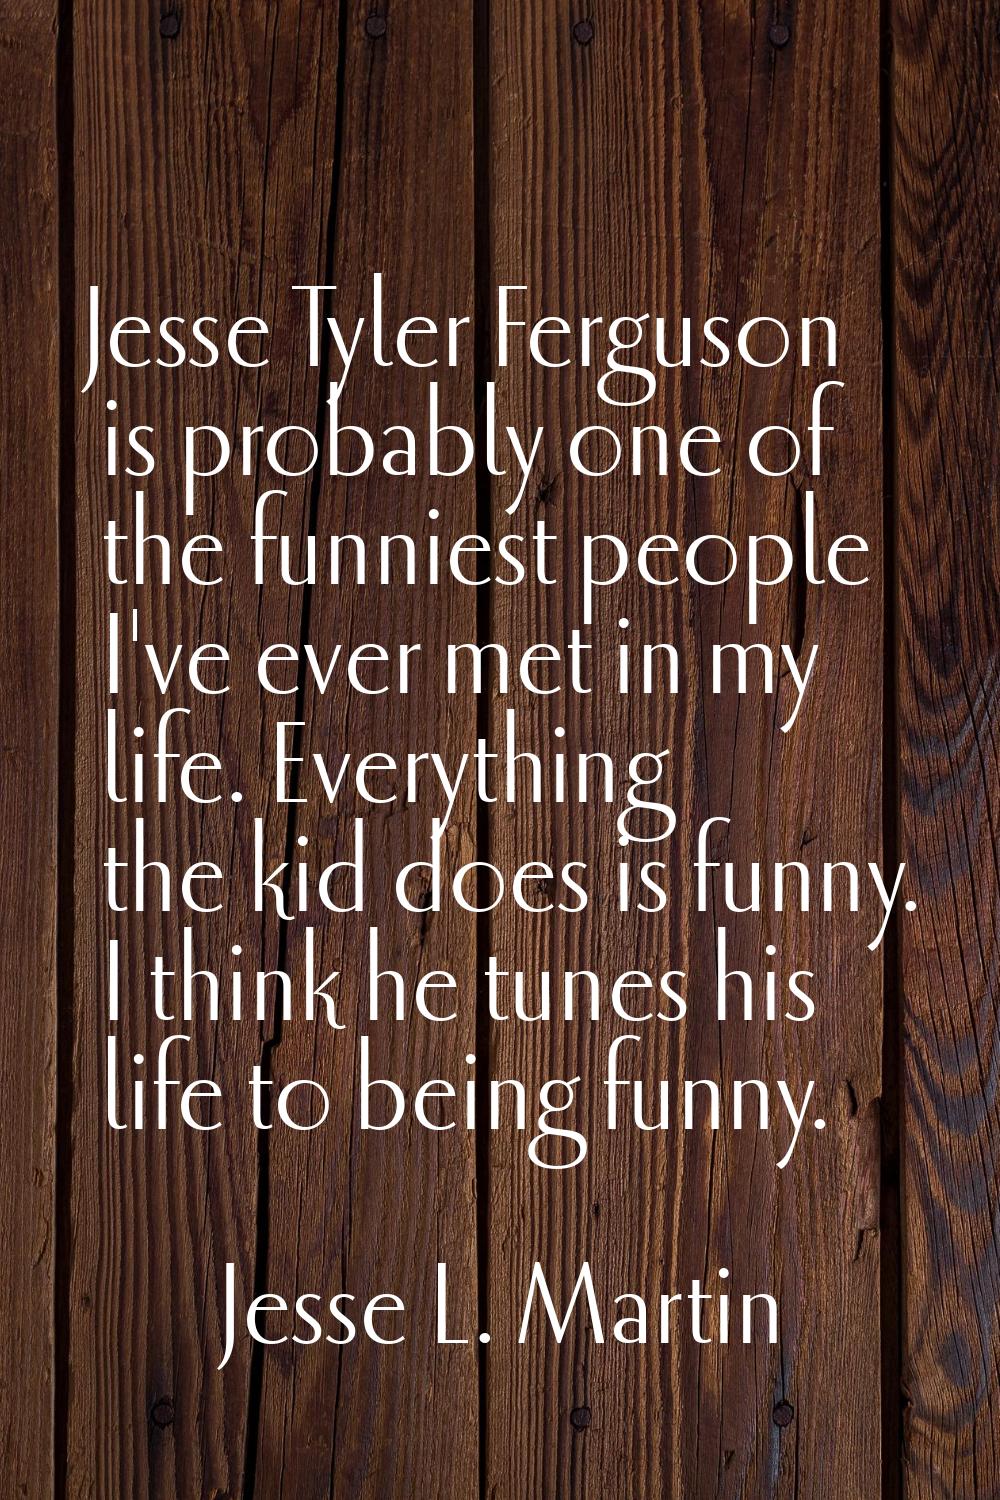 Jesse Tyler Ferguson is probably one of the funniest people I've ever met in my life. Everything th